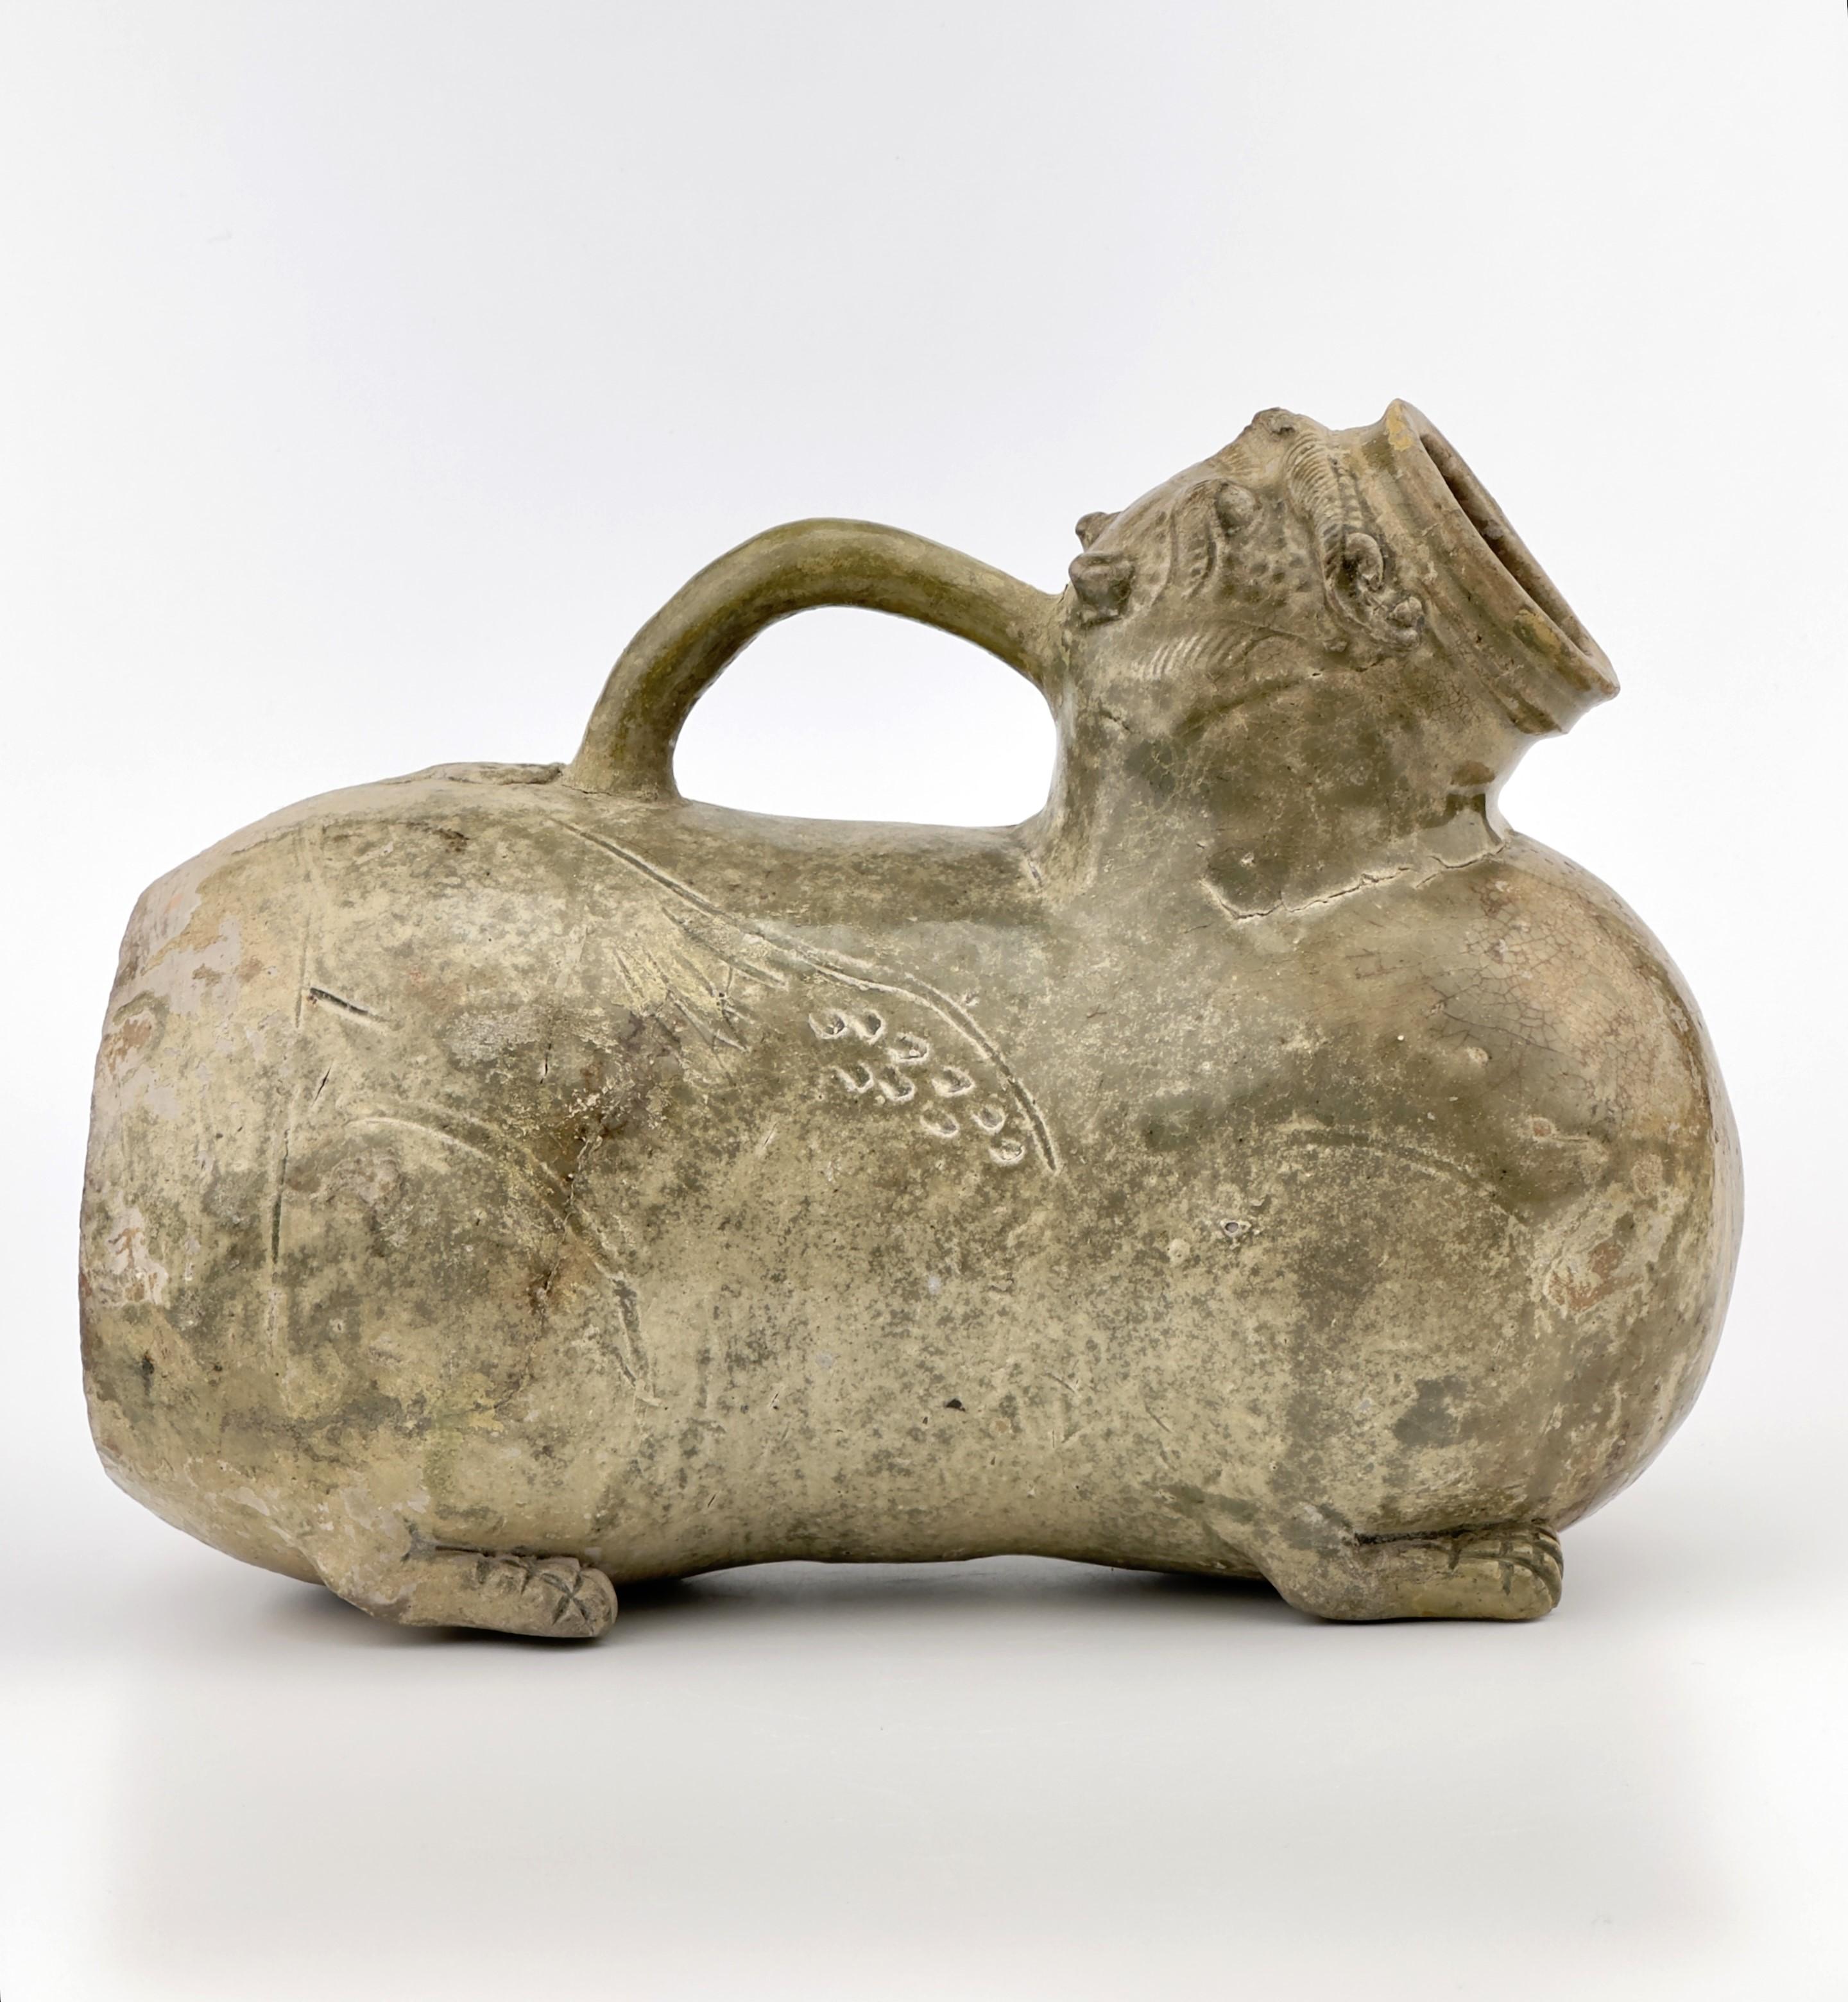 This vessel is well-modeled as a recumbent winged lion with detailed decorative elements. It features a grimacing face with large protruberant eyes under heavy brows and a gaping mouth, which forms a large aperture. The piece has a tail that arches